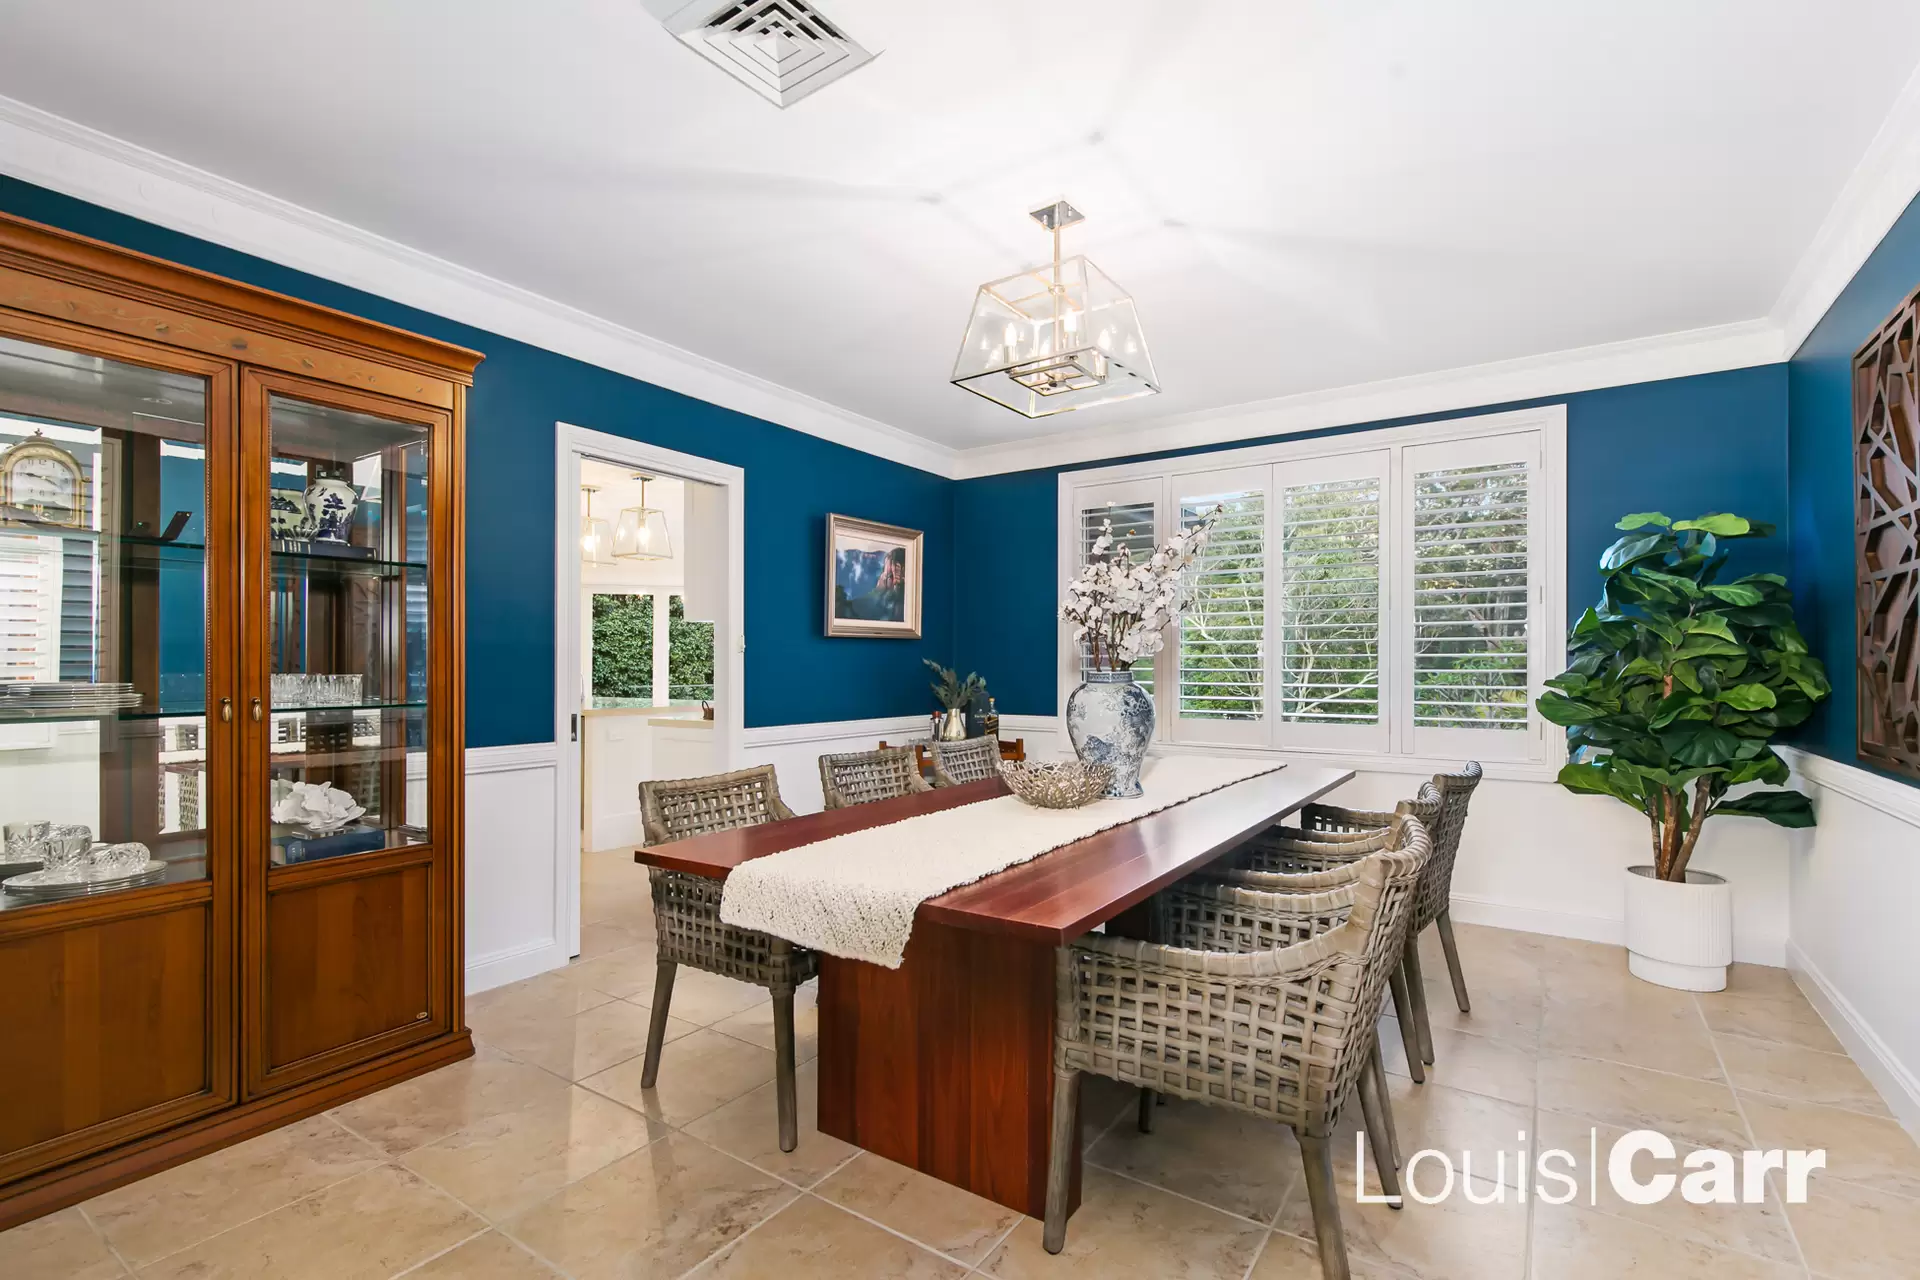 Photo #8: 2 Rodney Place, West Pennant Hills - Sold by Louis Carr Real Estate